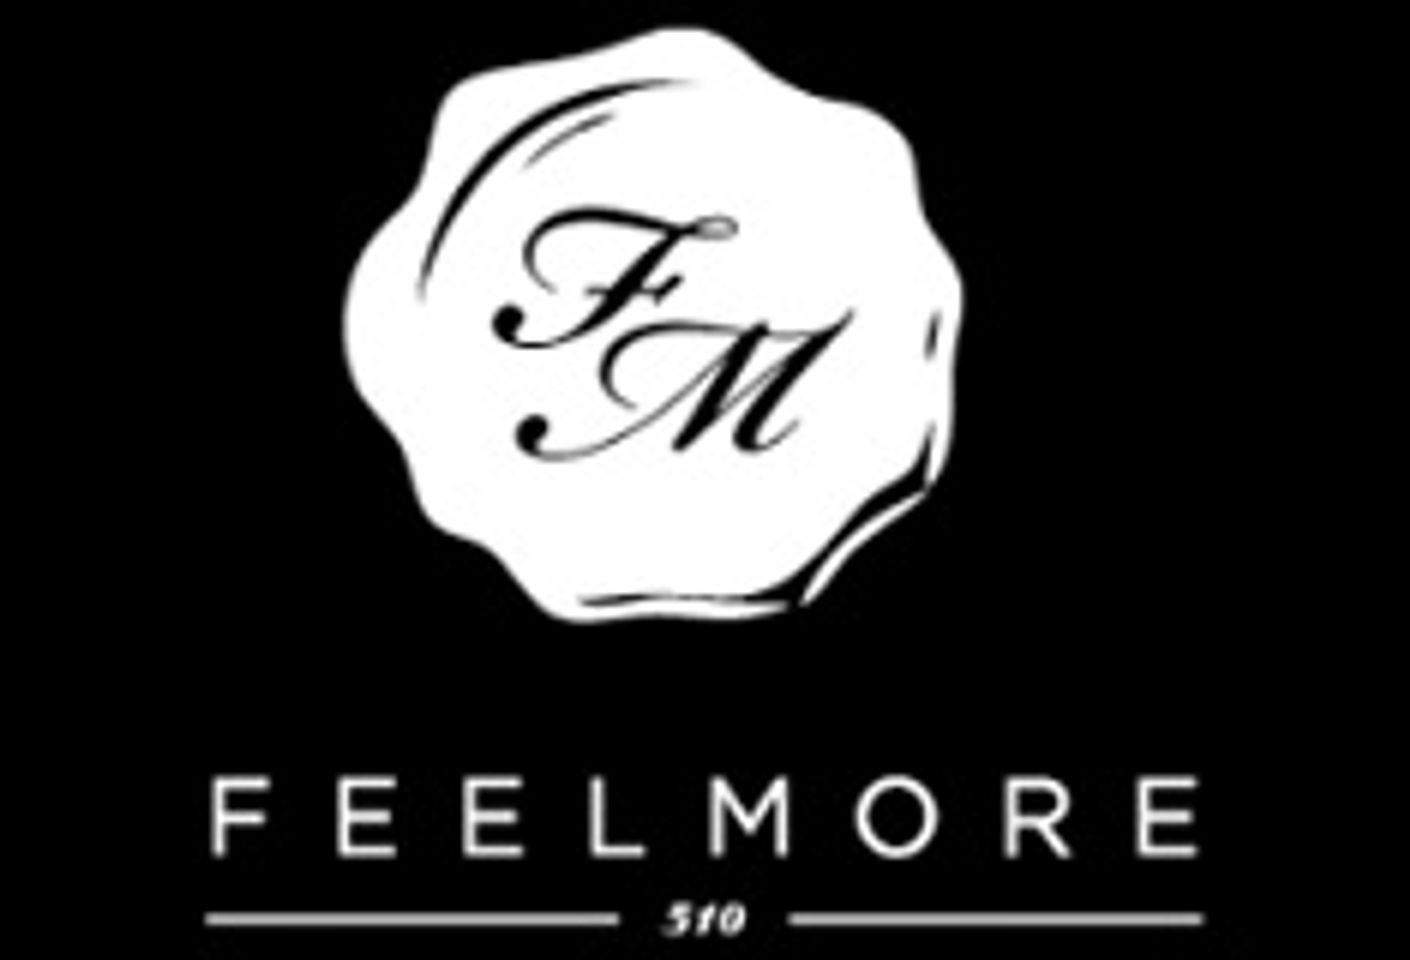 Feelmore510 Tapped to Lead Lube Workshops